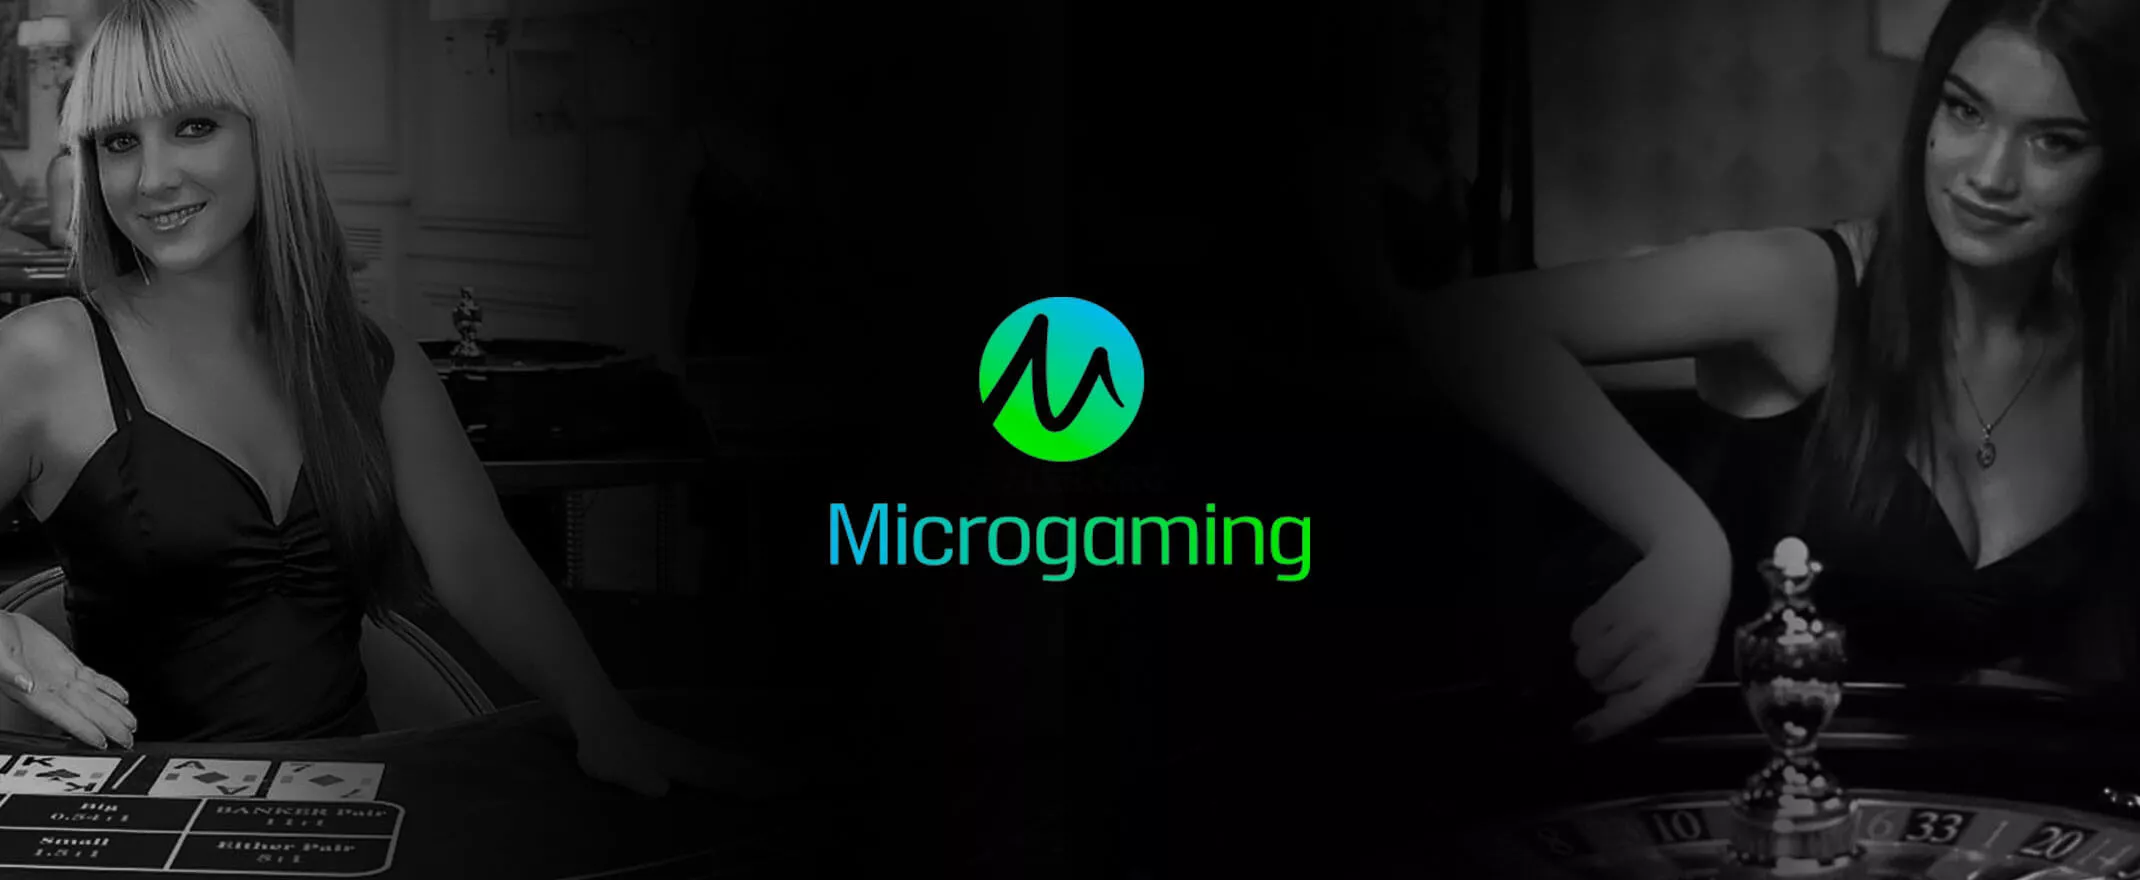 Microgaming live casino banner